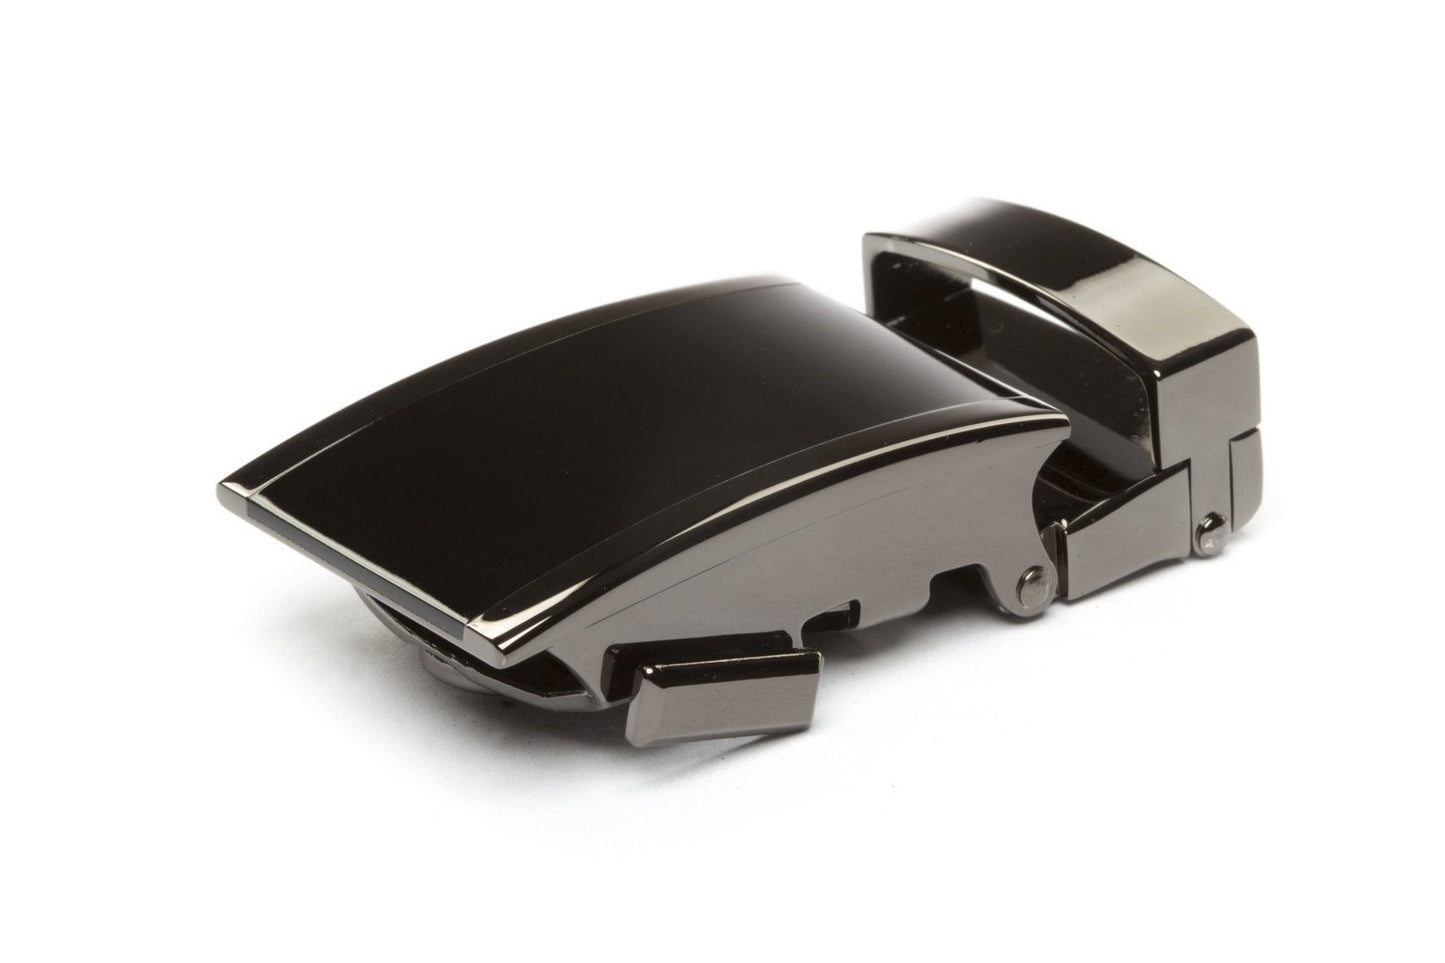 Men's onyx ratchet belt buckle in smoked gunmetal with a 1.25-inch width.